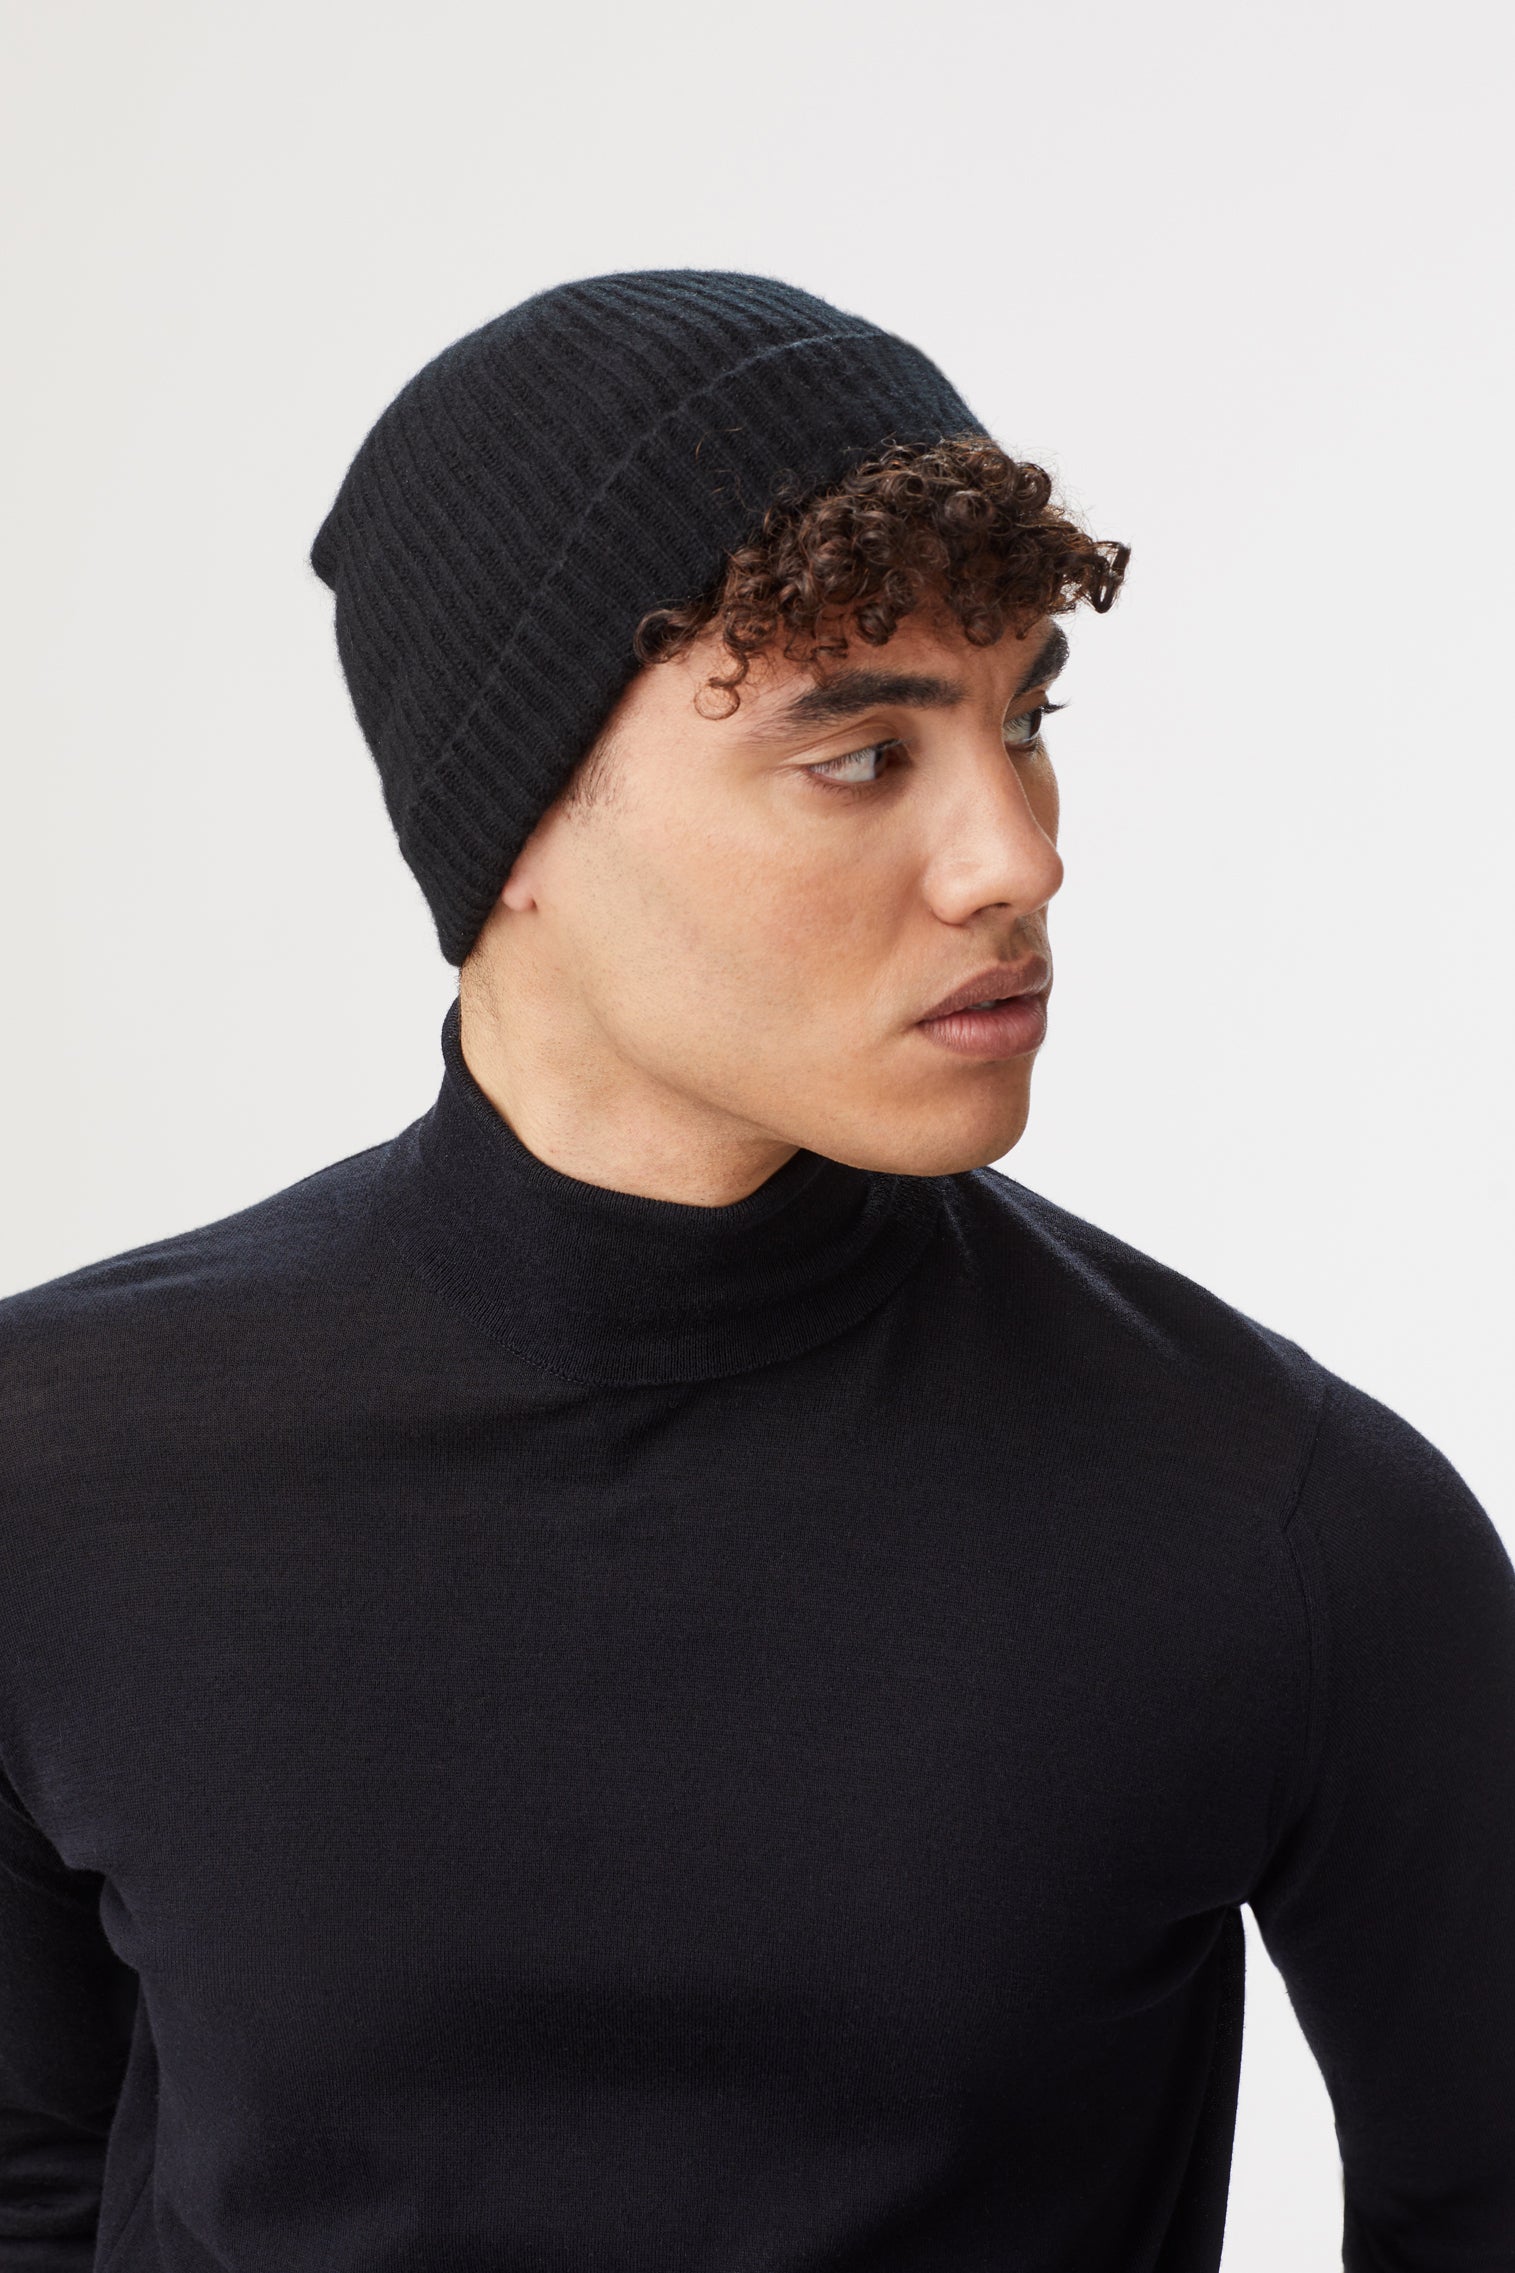 Black Cashmere Ski Beanie - Hats for Round Face Shapes - Lock & Co. Hatters London UK